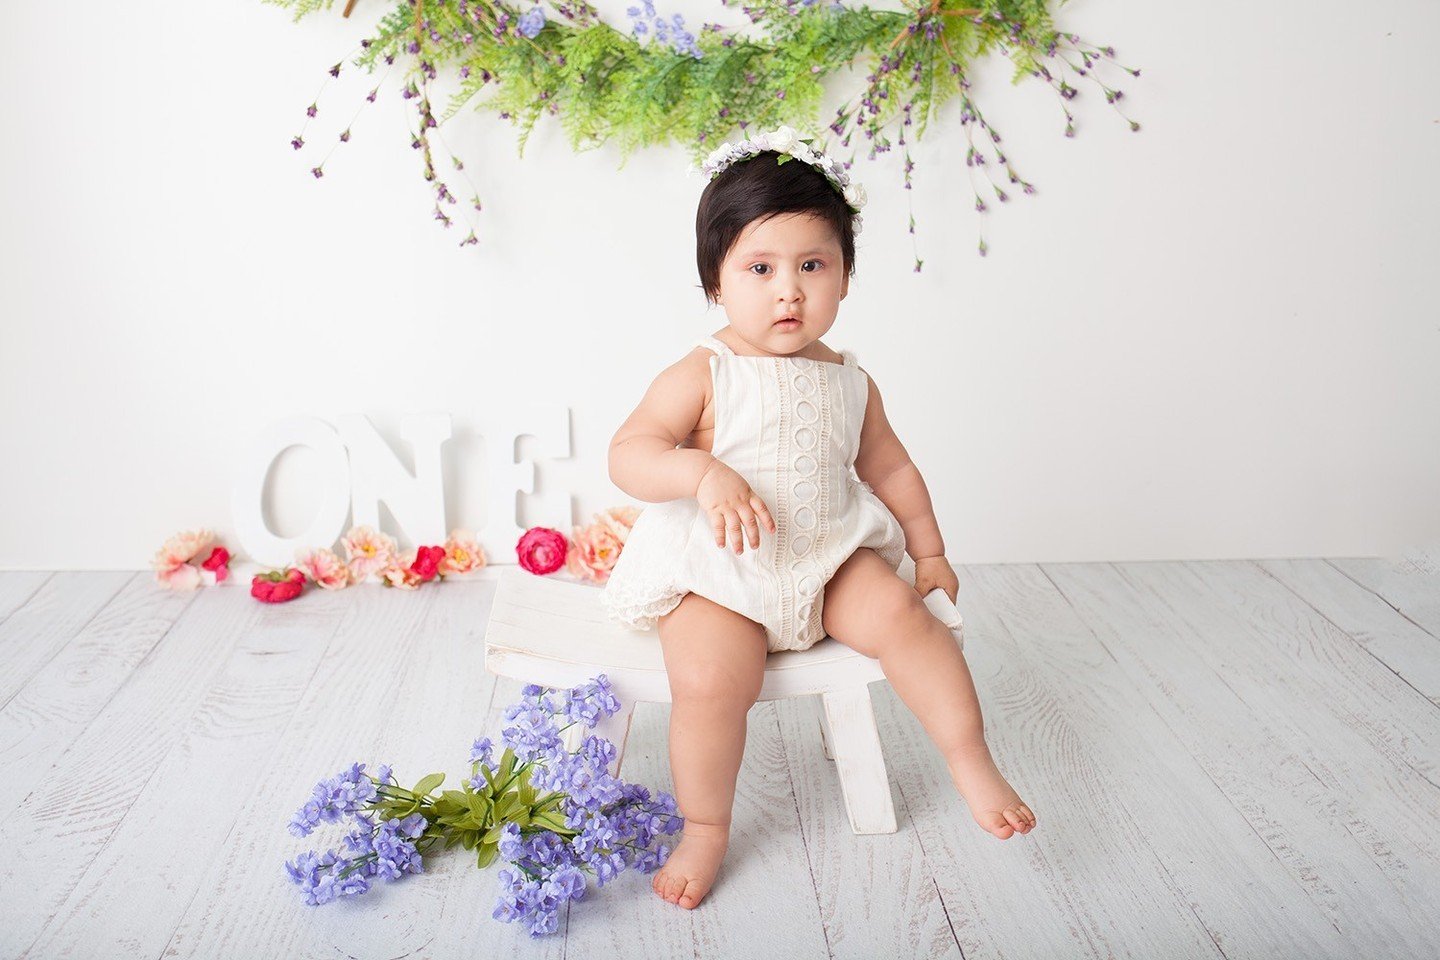 Capture your baby first pictures! Just as they are 🎀

We help you plan it! Lots of props &amp; options available 📸

Book your photoshoot online visit www.priscillagreenphotography.com click the menu &quot;booking&quot;